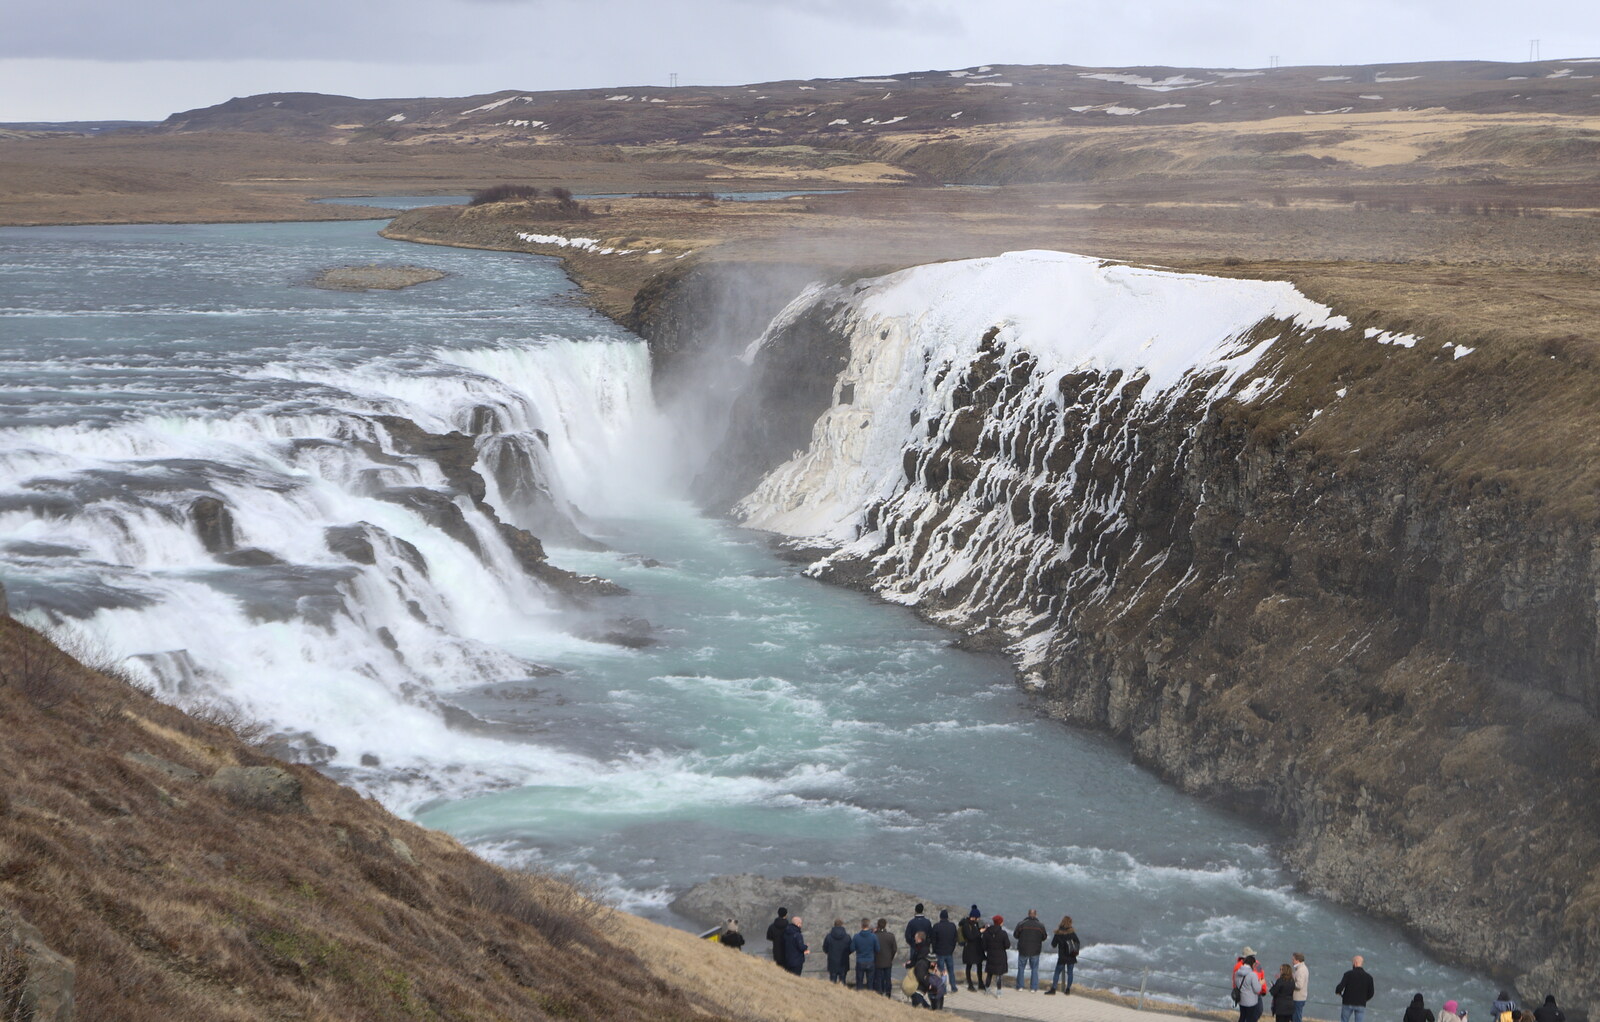 The epic Gullfoss waterfall is the next stop from The Golden Circle of Ísland, Iceland - 22nd April 2017